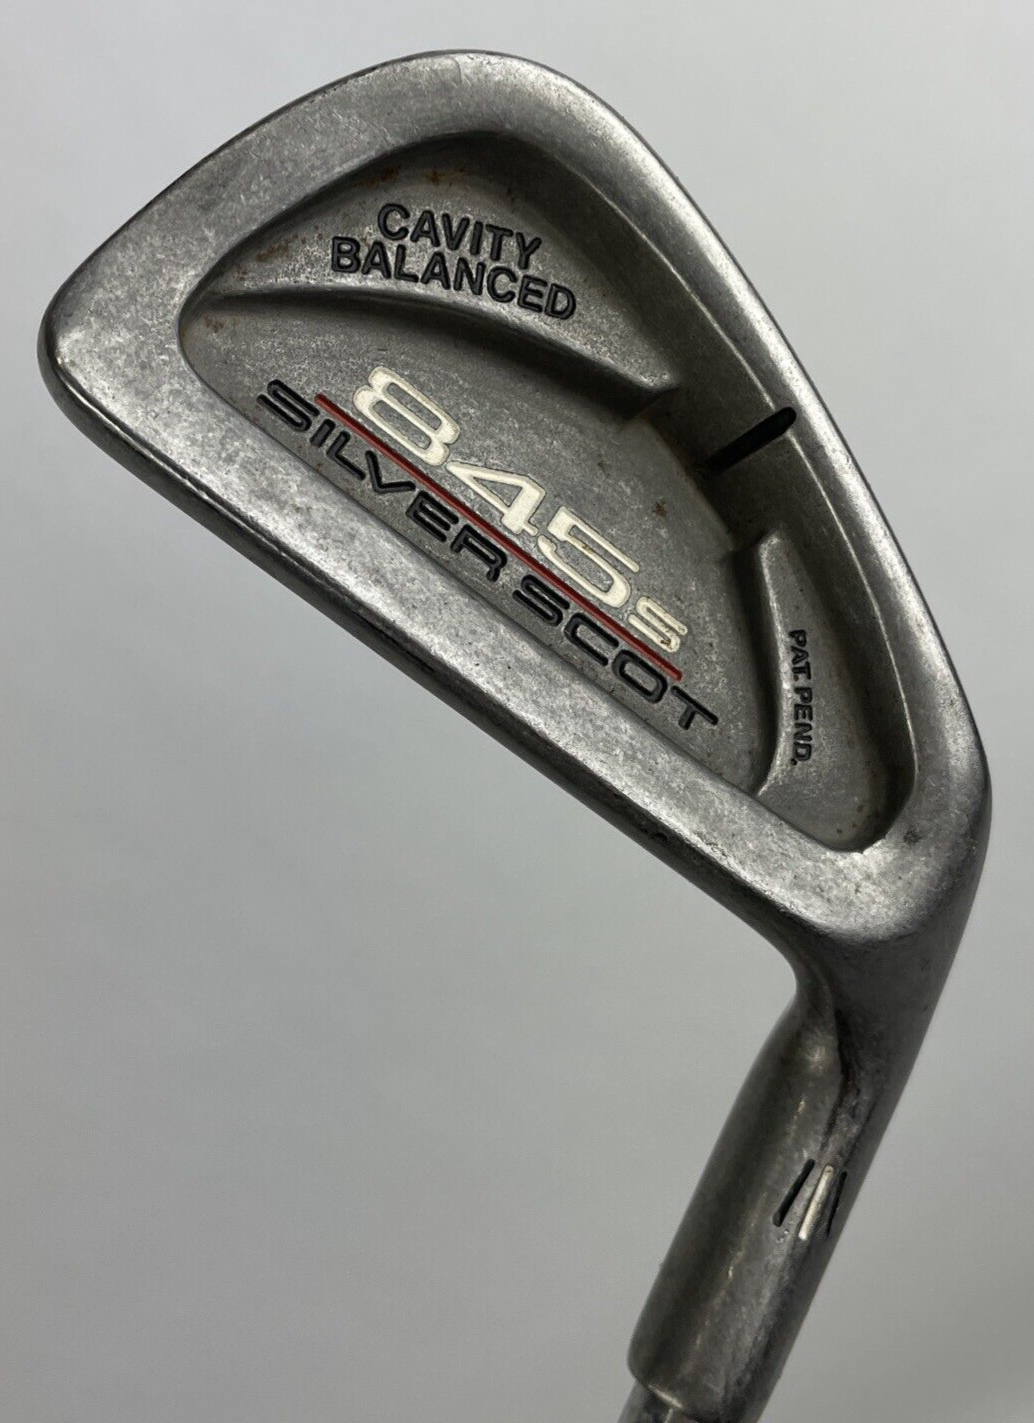 Primary image for Tommy Armour 845 S Silver Scot Single 2 - Driving Iron RH Steel Stiff Flex